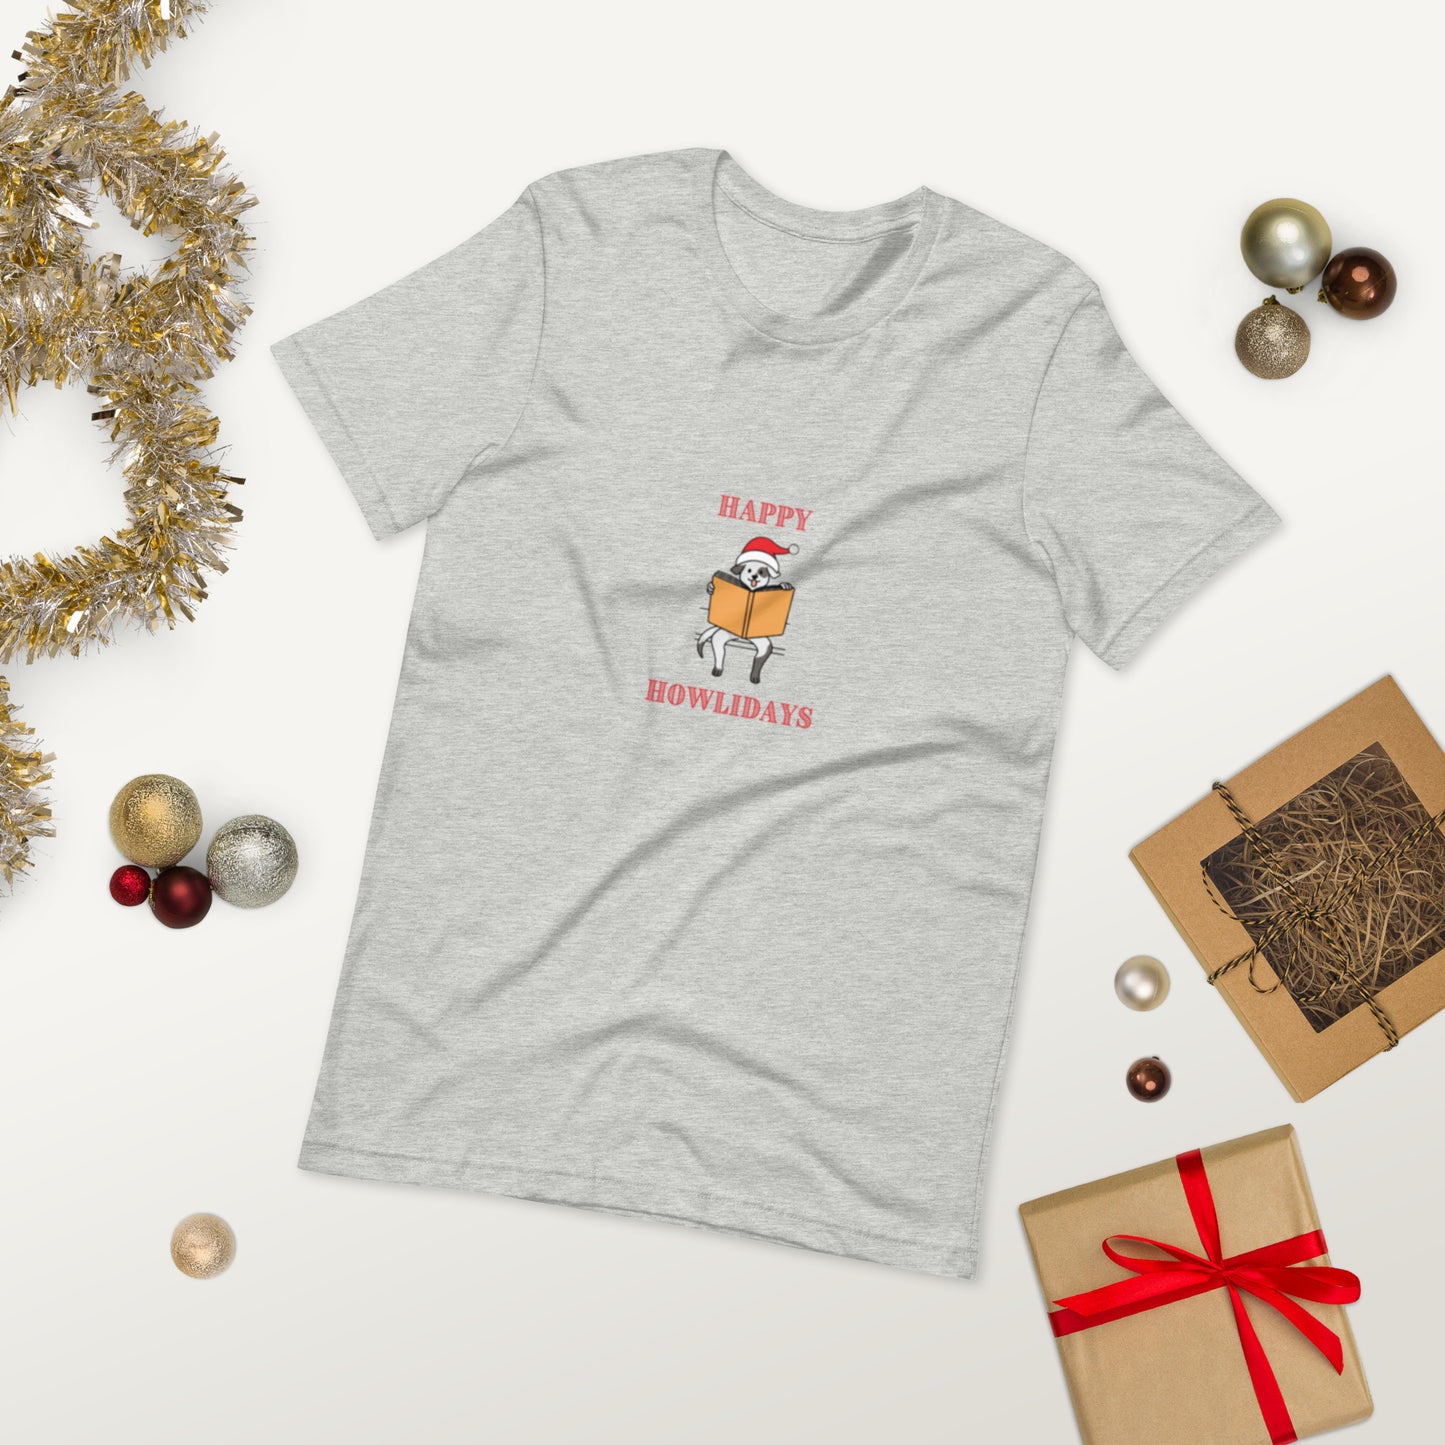 Happy Howlidays Unisex T-Shirt - The Spinster Librarian Shop